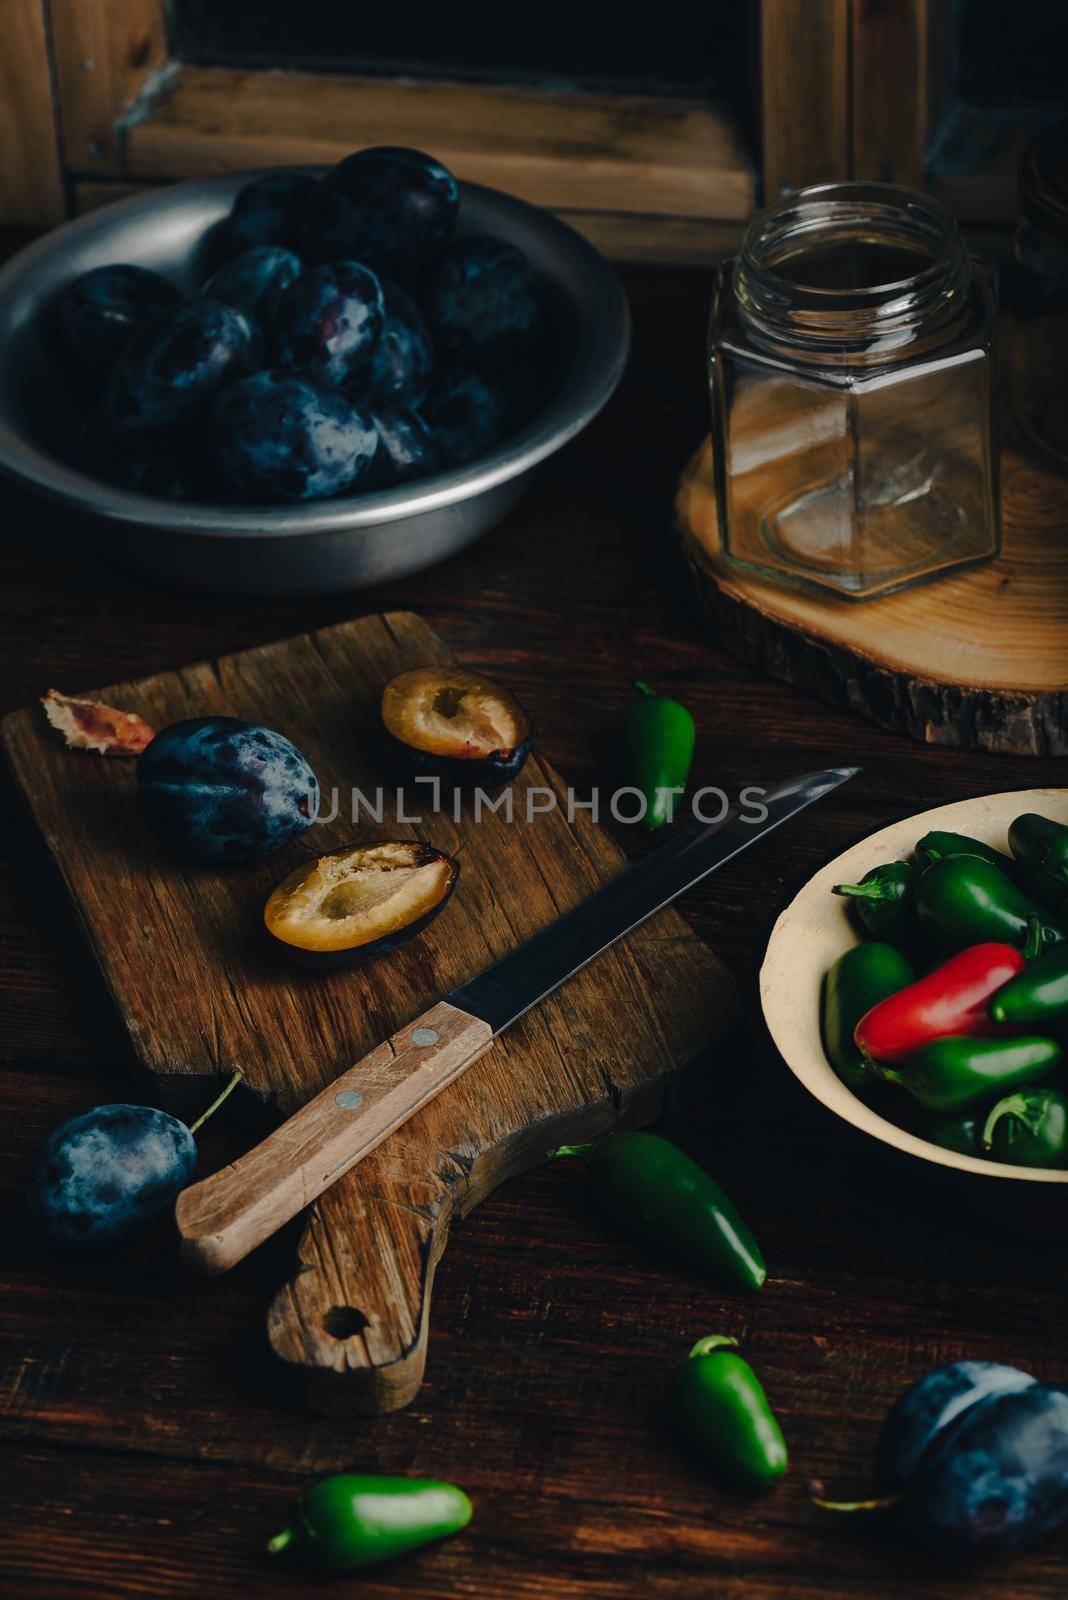 Plum and Jalapeno for Preparing Homemade Hot Jelly